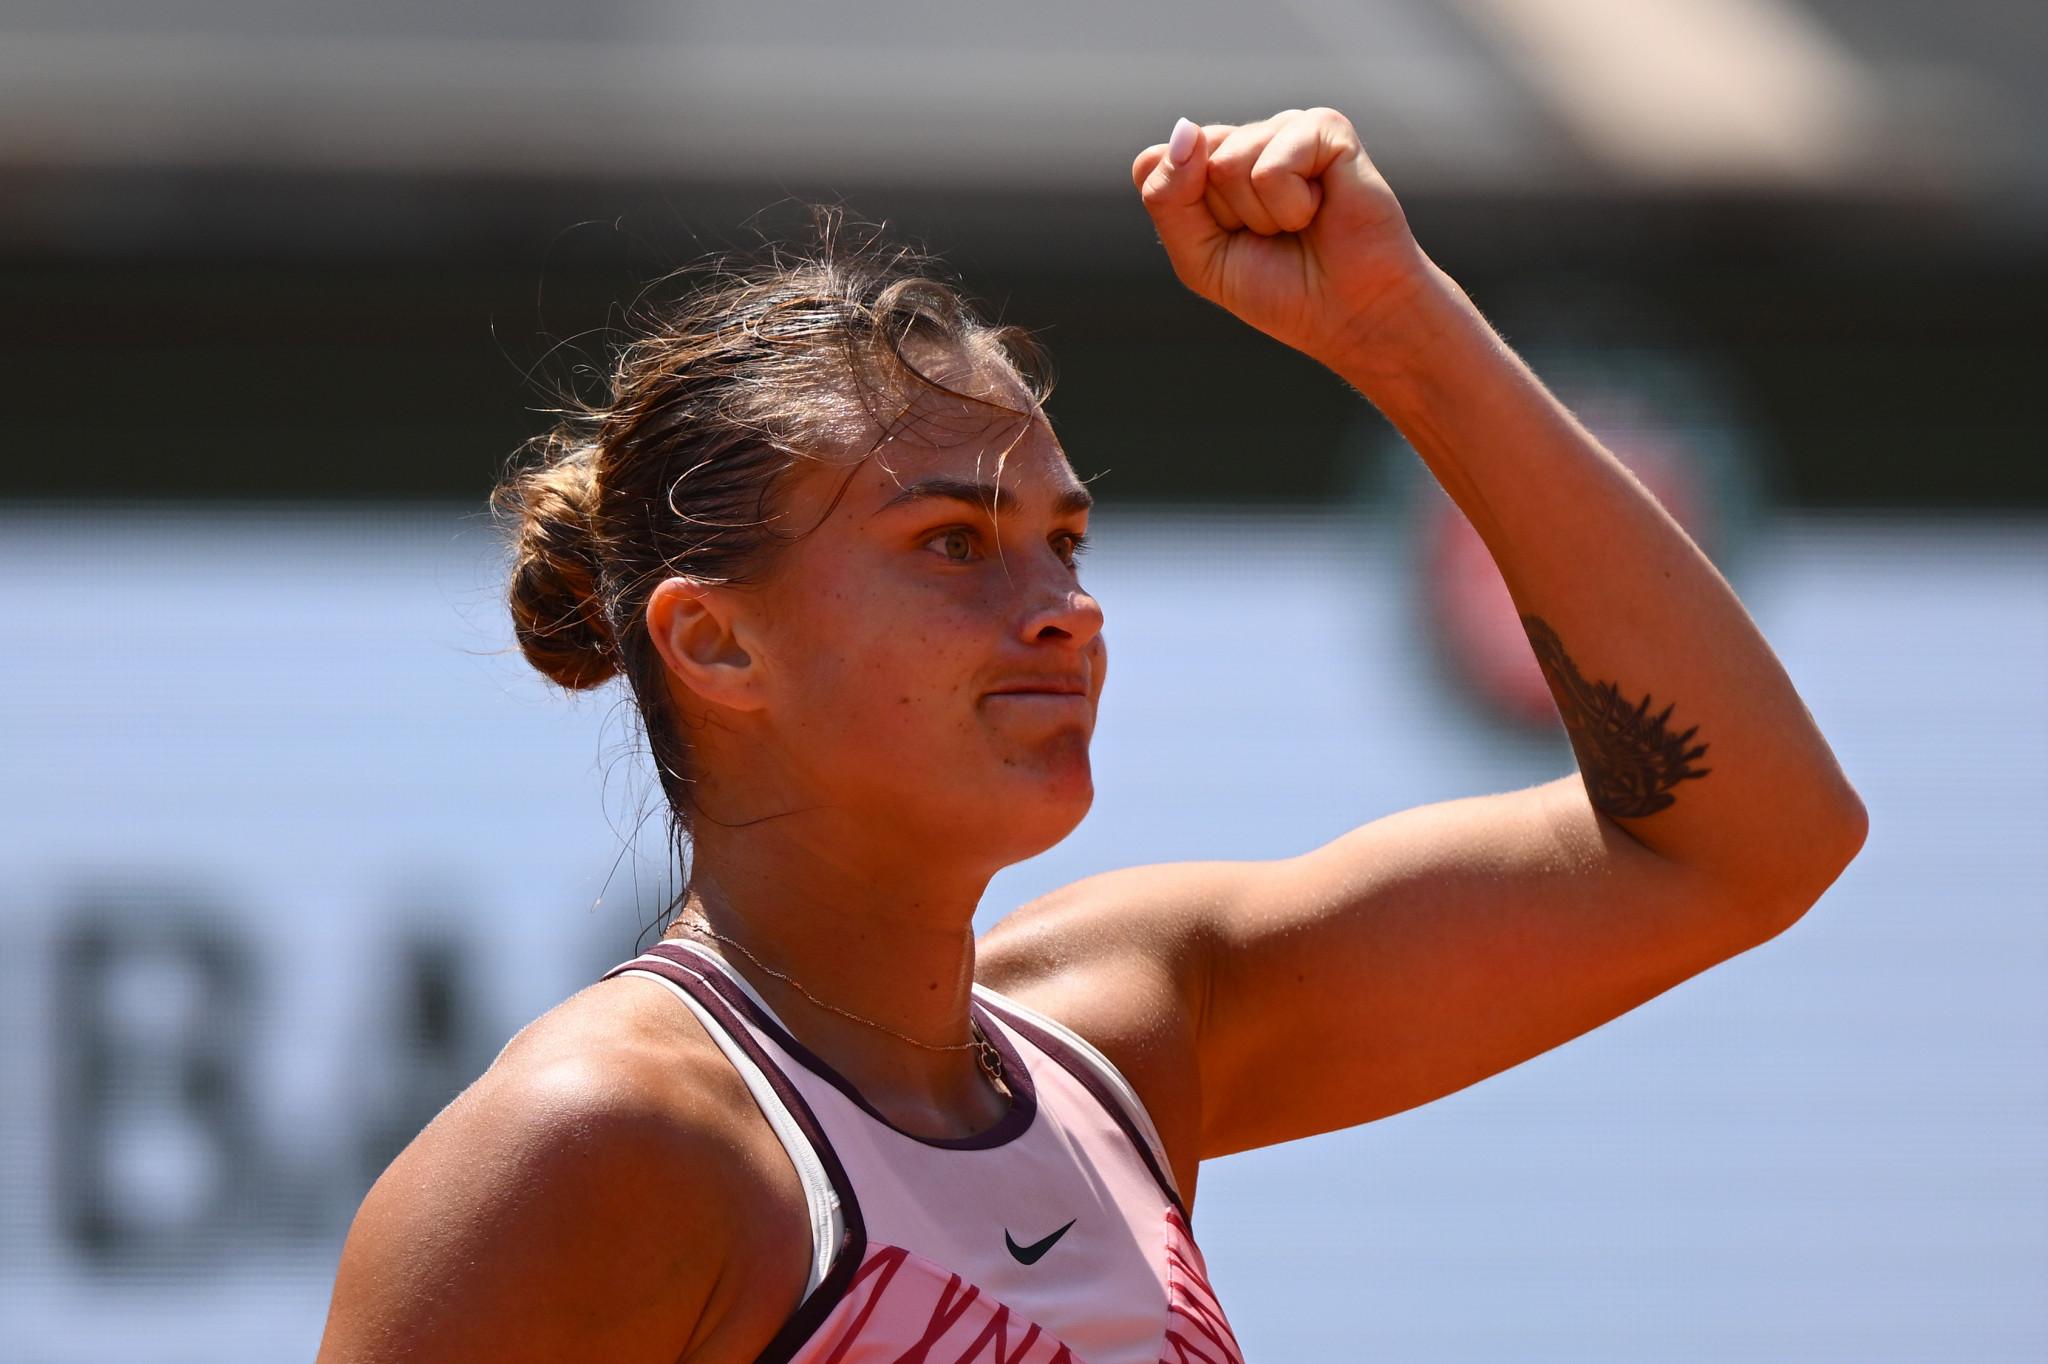 Sabalenka doesn't support Lukashenko "right now" after resuming media duties at French Open